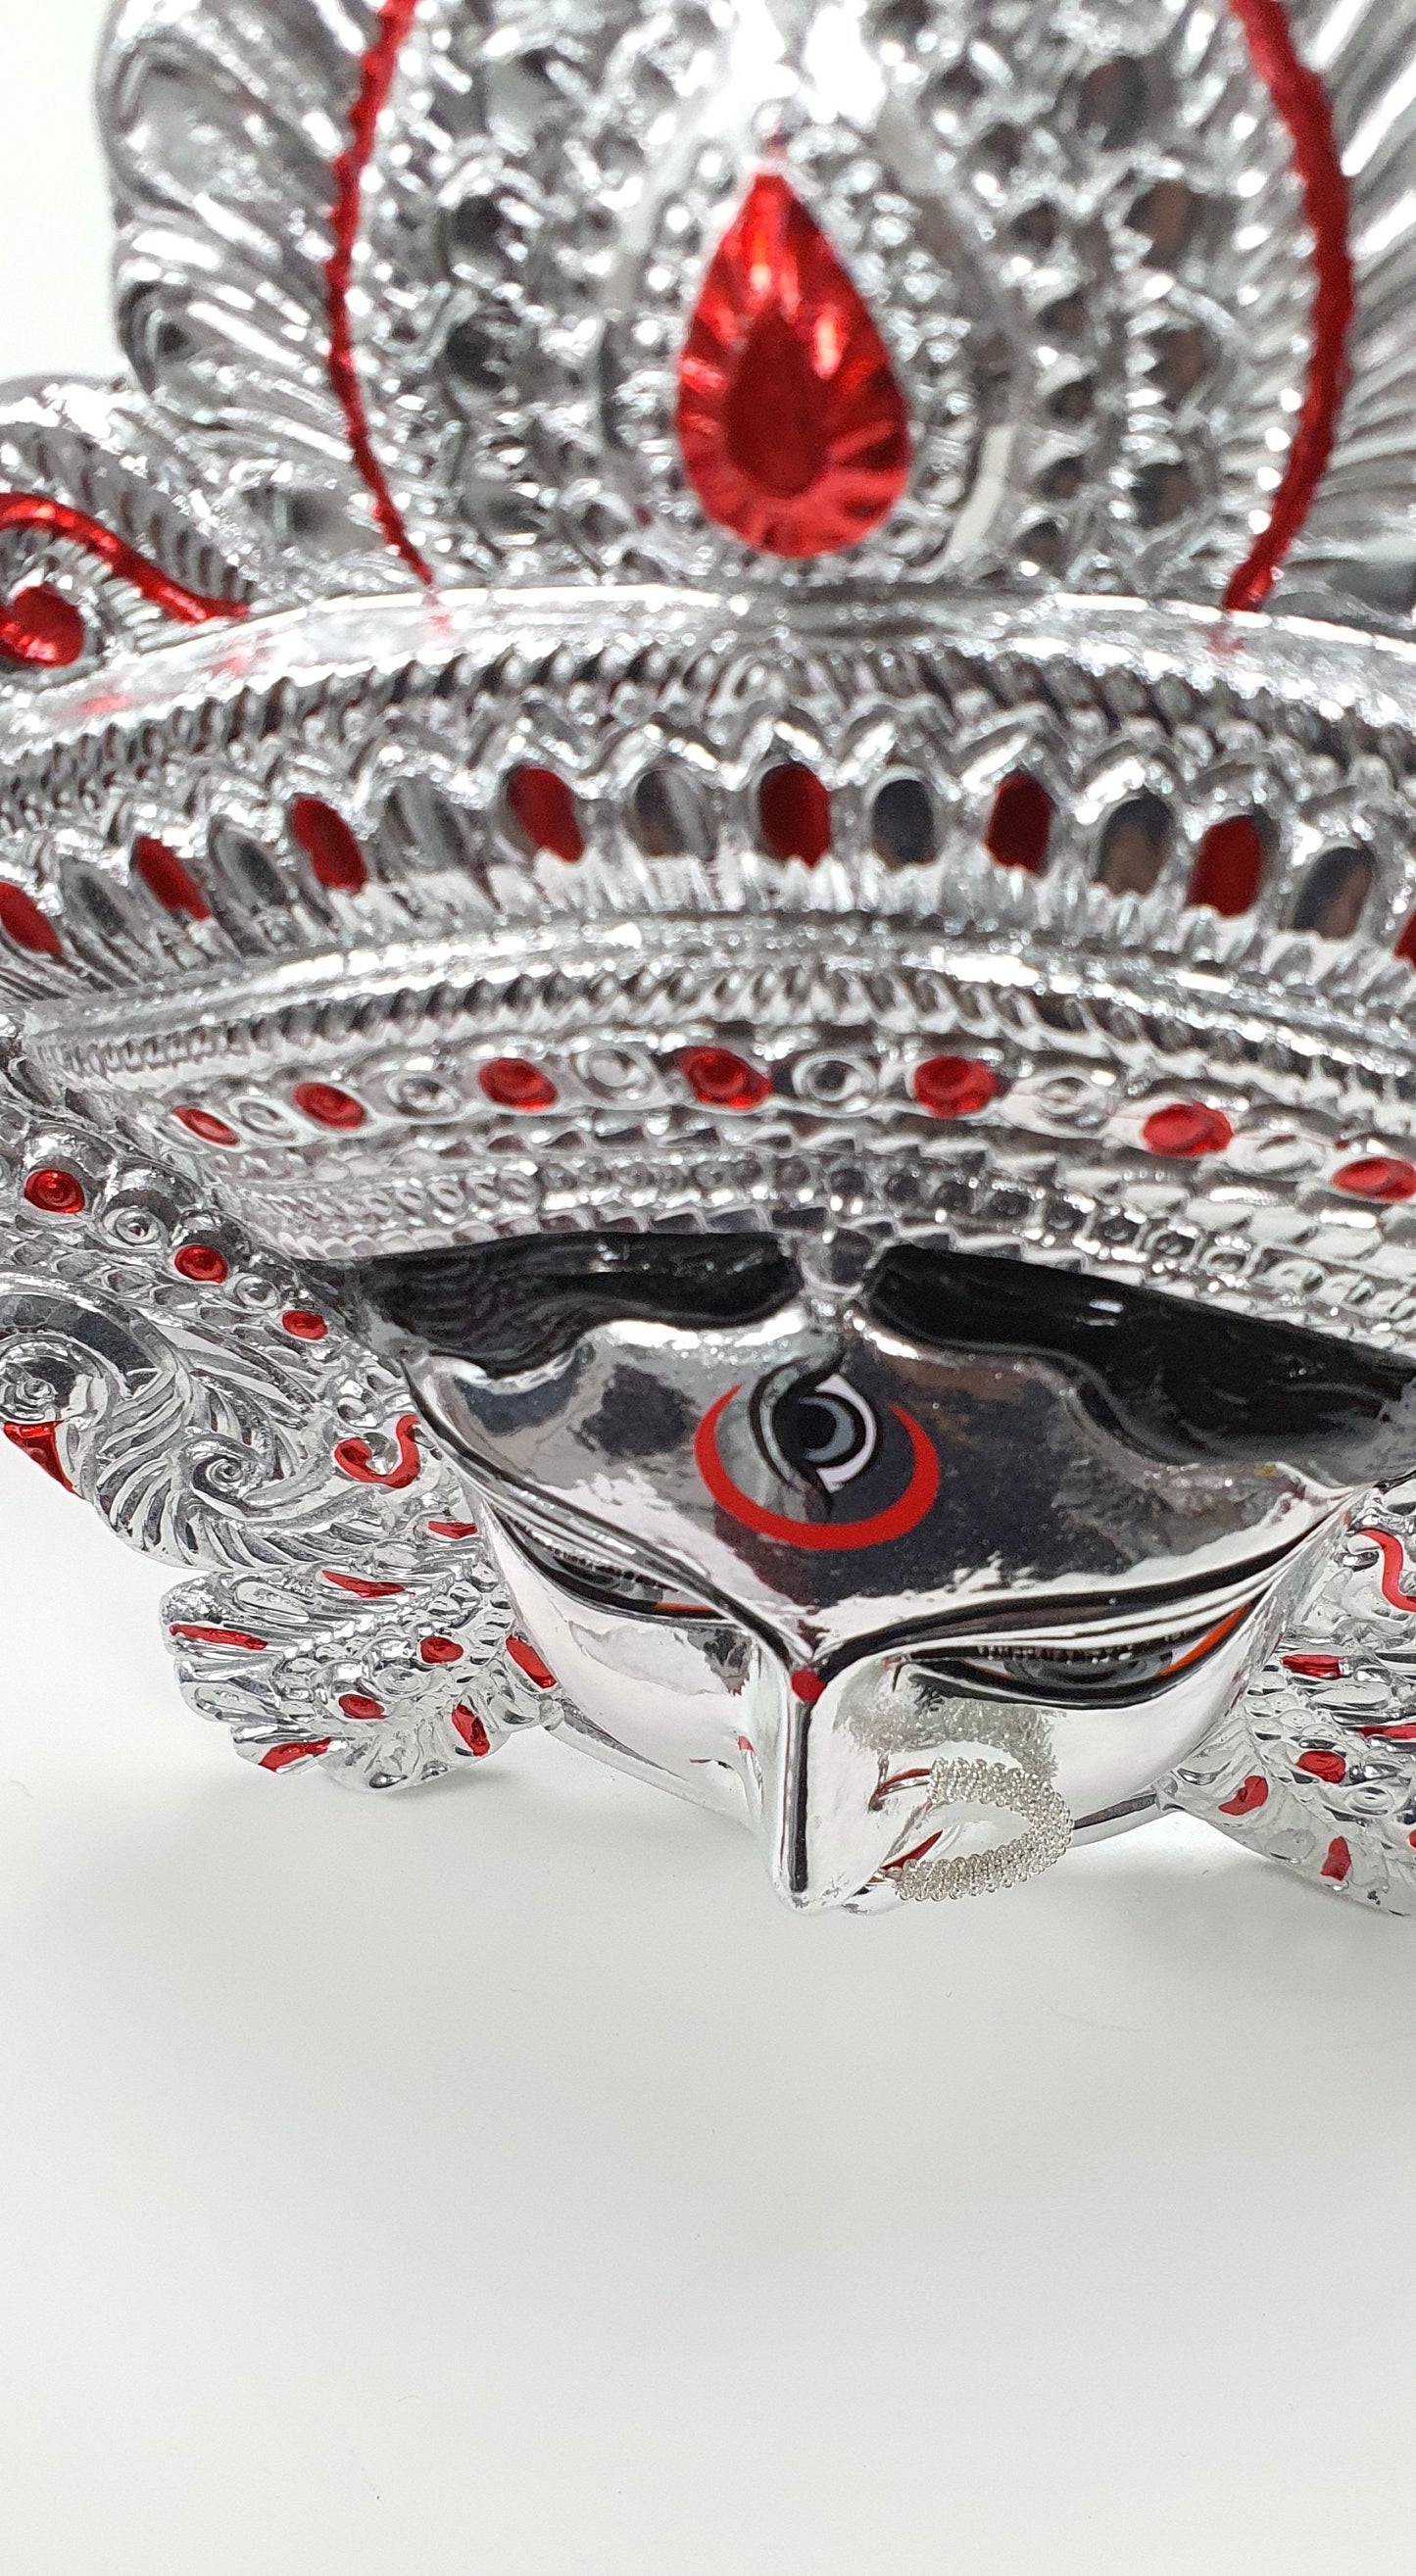 SIZE-M Goddess Durga ( Kali ) Rare Chrome/Silver Wall Hanging Face With Nose Ring